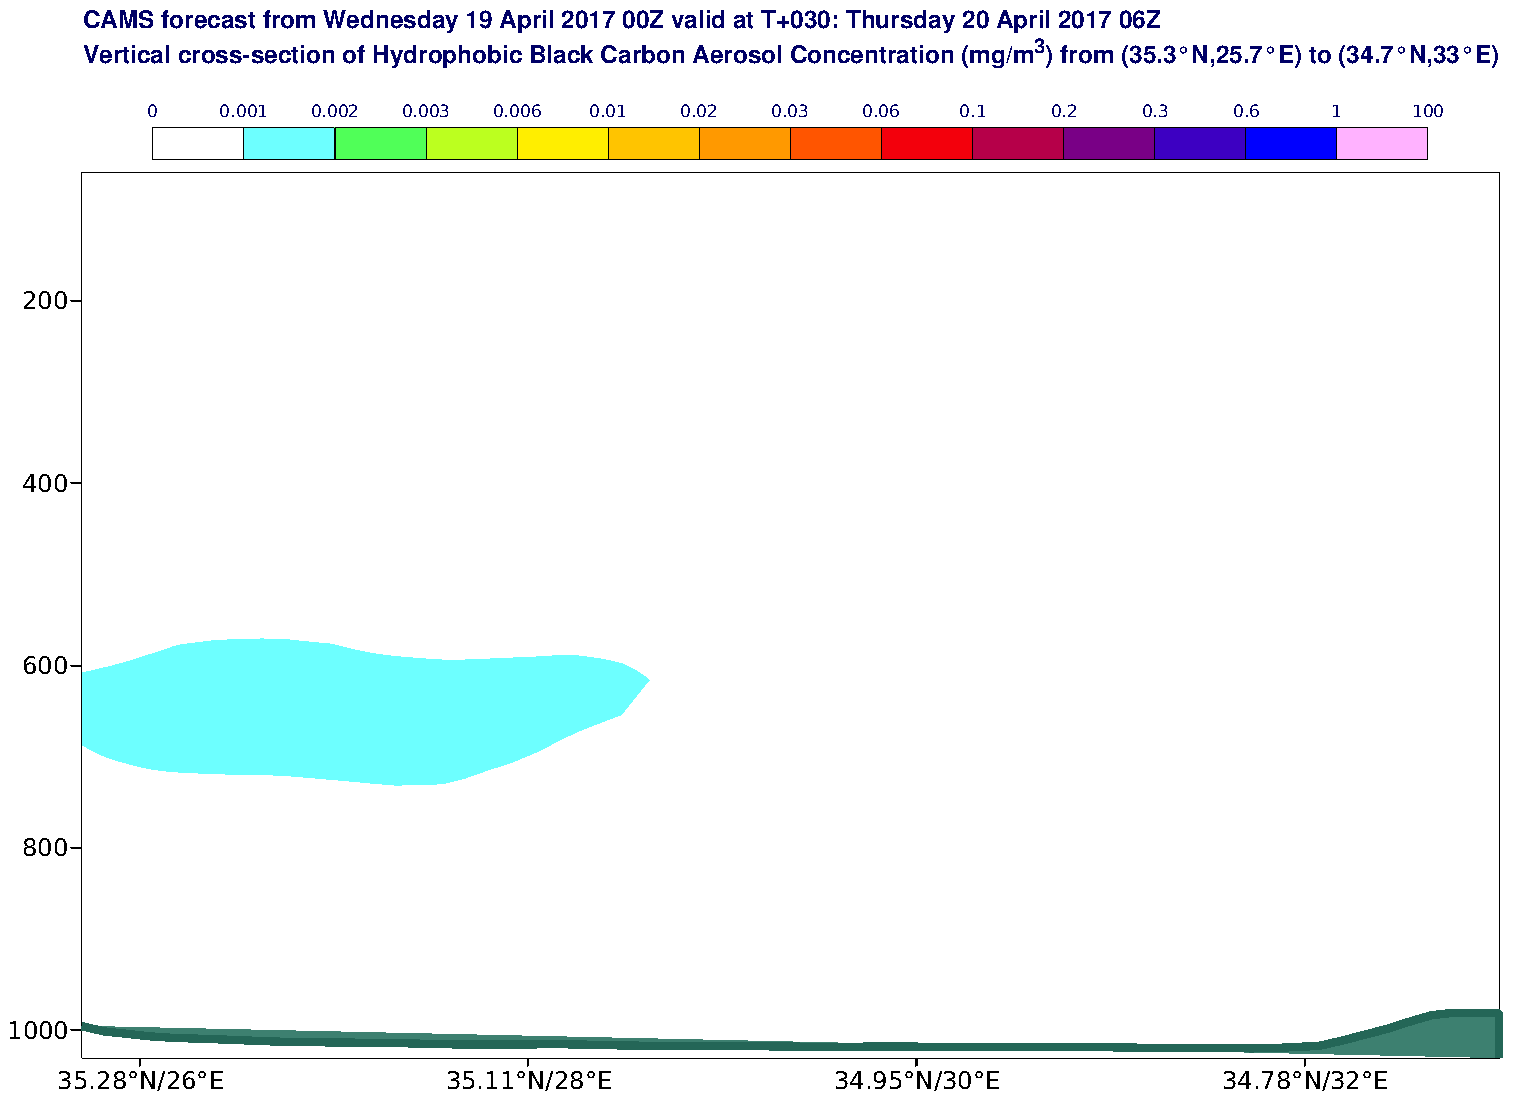 Vertical cross-section of Hydrophobic Black Carbon Aerosol Concentration (mg/m3) valid at T30 - 2017-04-20 06:00